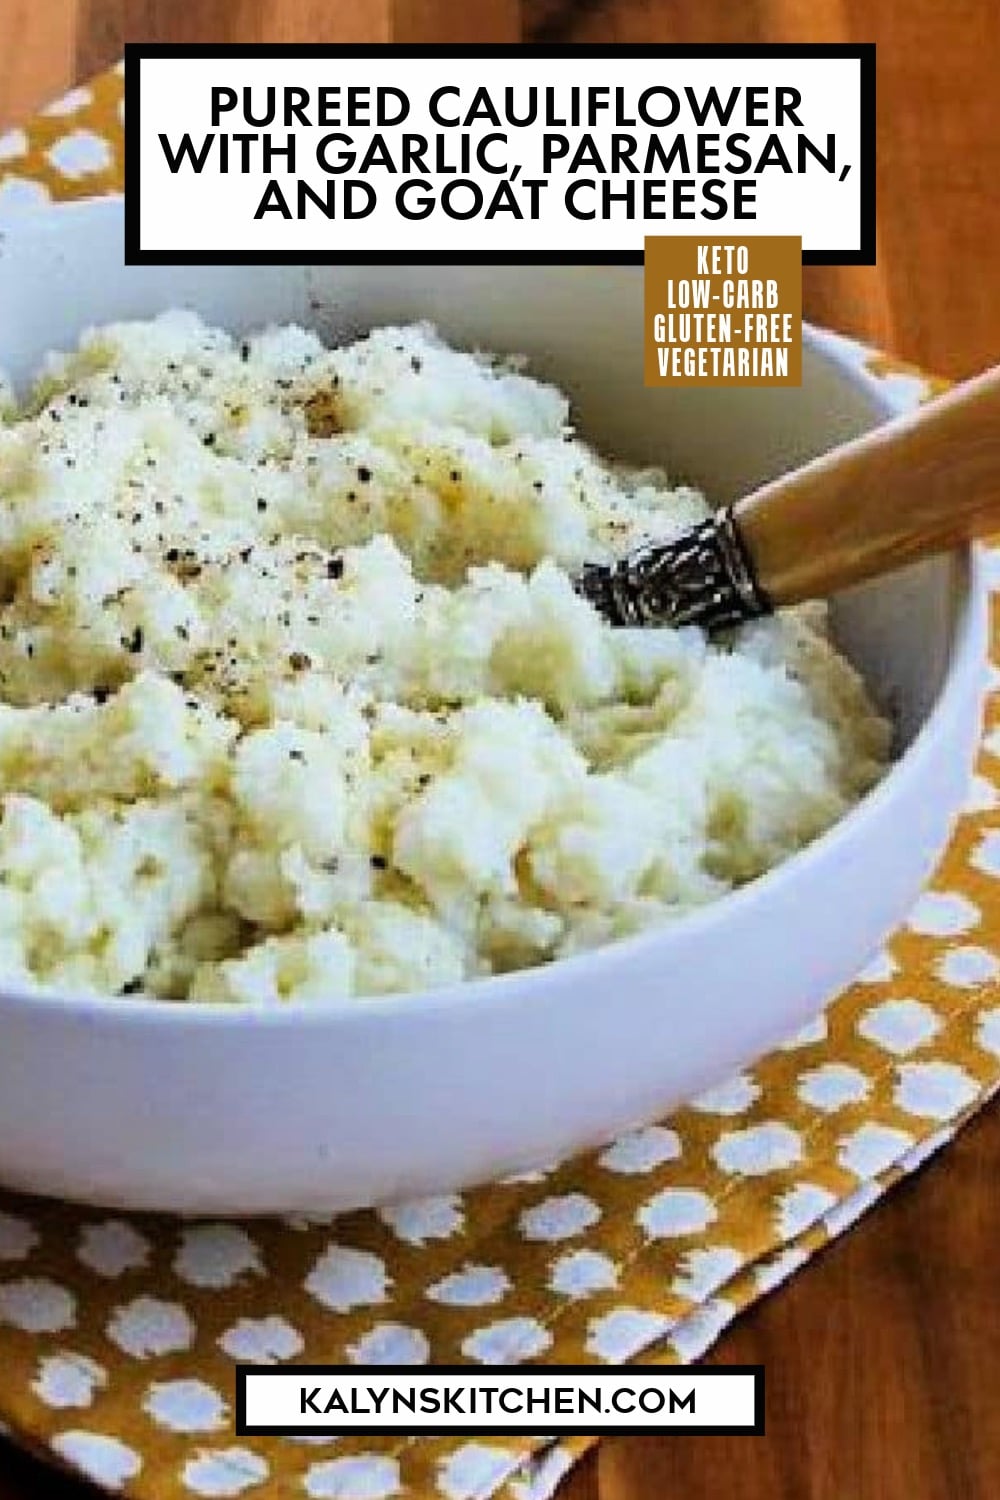 Pinterest image of Pureed Cauliflower with Garlic, Parmesan, and Goat Cheese